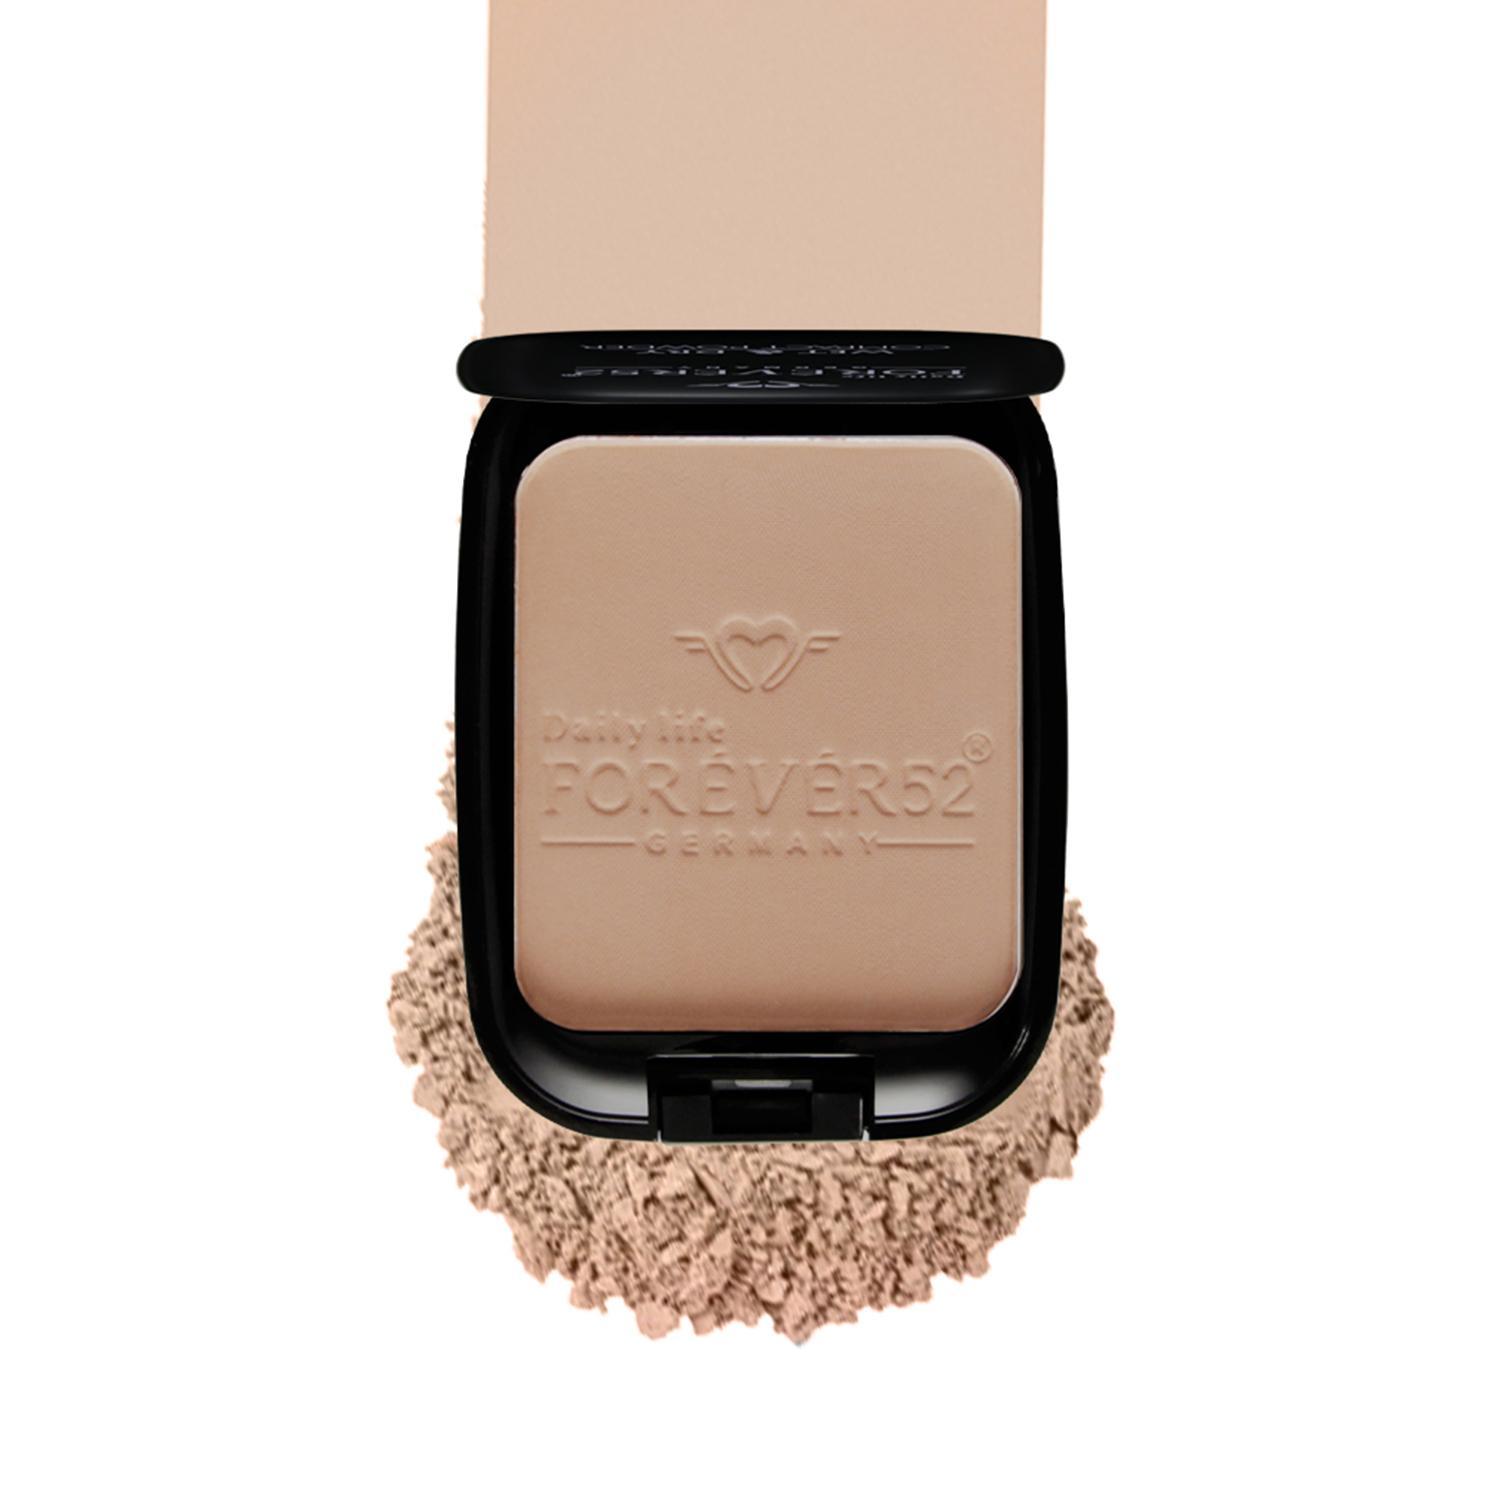 daily-life-forever52-wet-&-dry-compact-powder-wd005---sand-(12g)